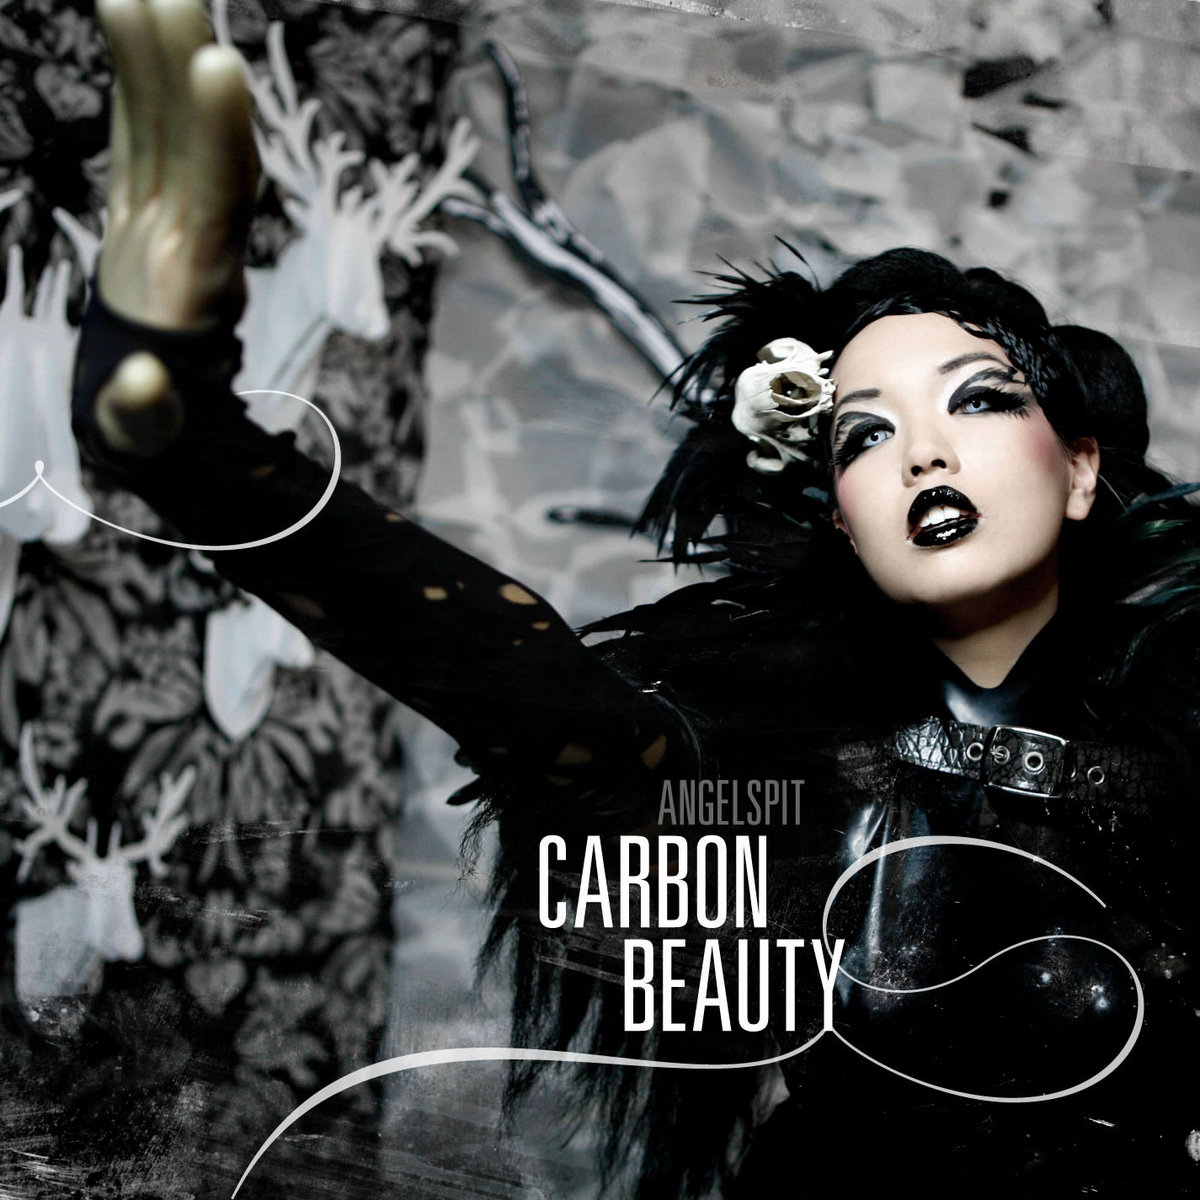 Angelspit Carbon Beauty cover artwork